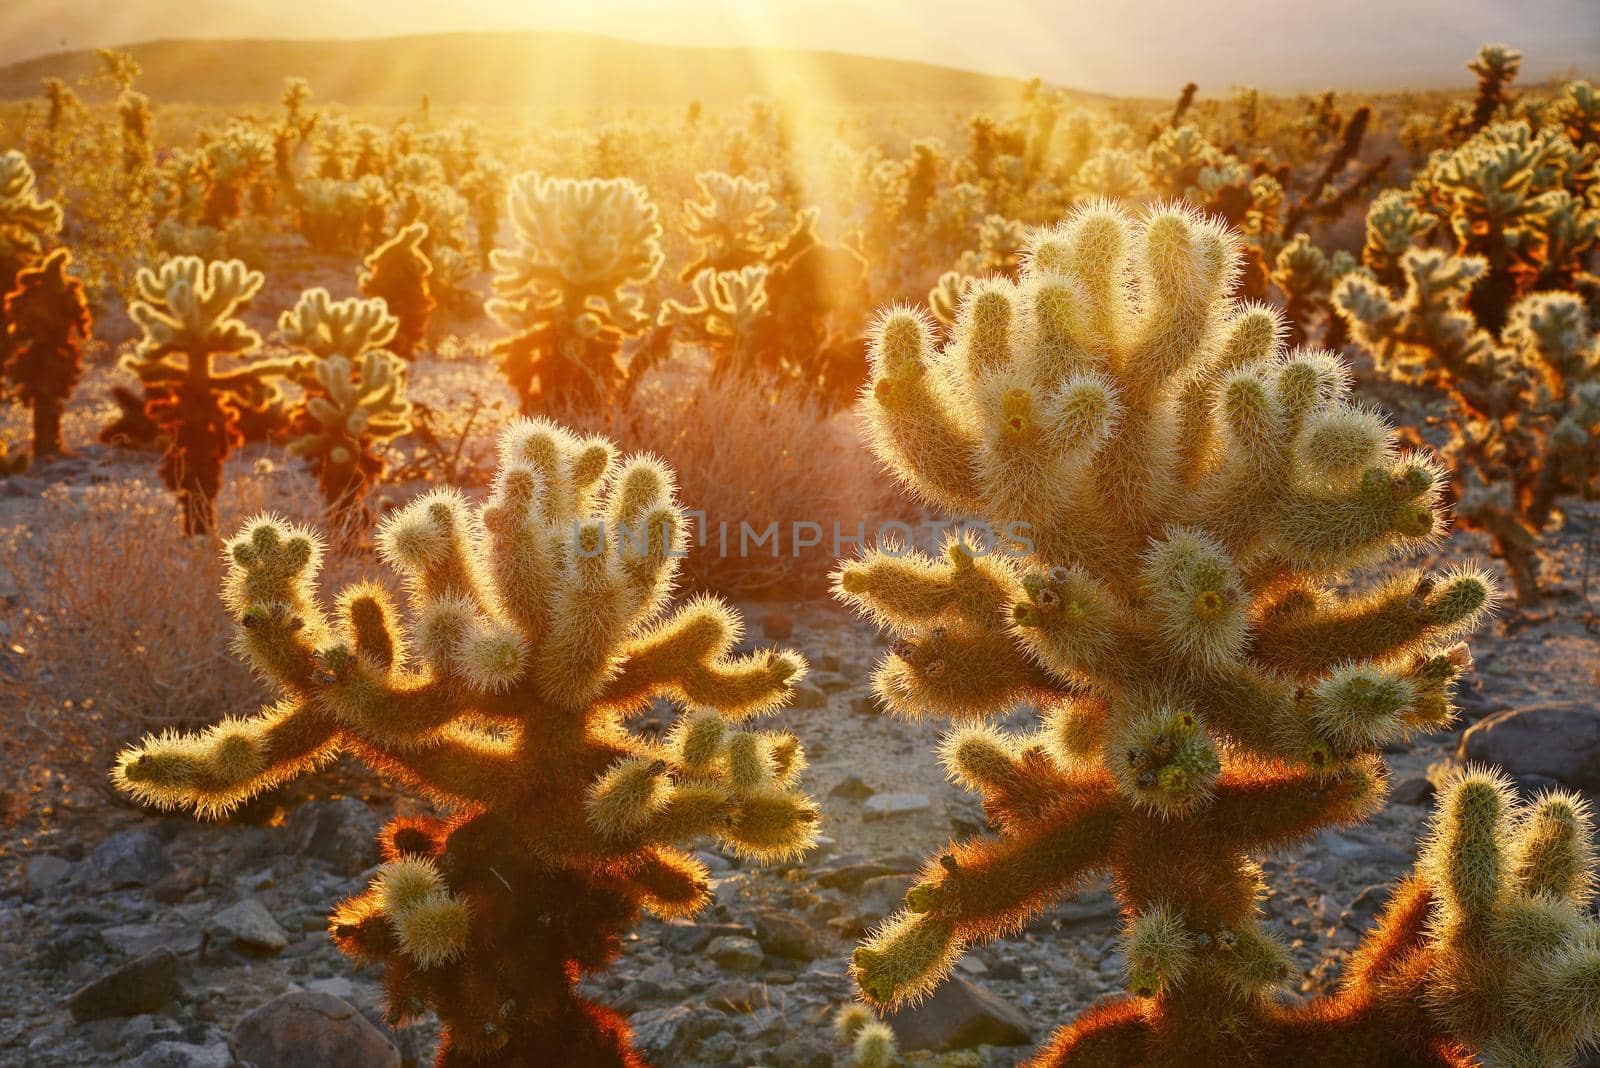 cholla cactus garden from Joshua Tree national park with a warm morning sunlight